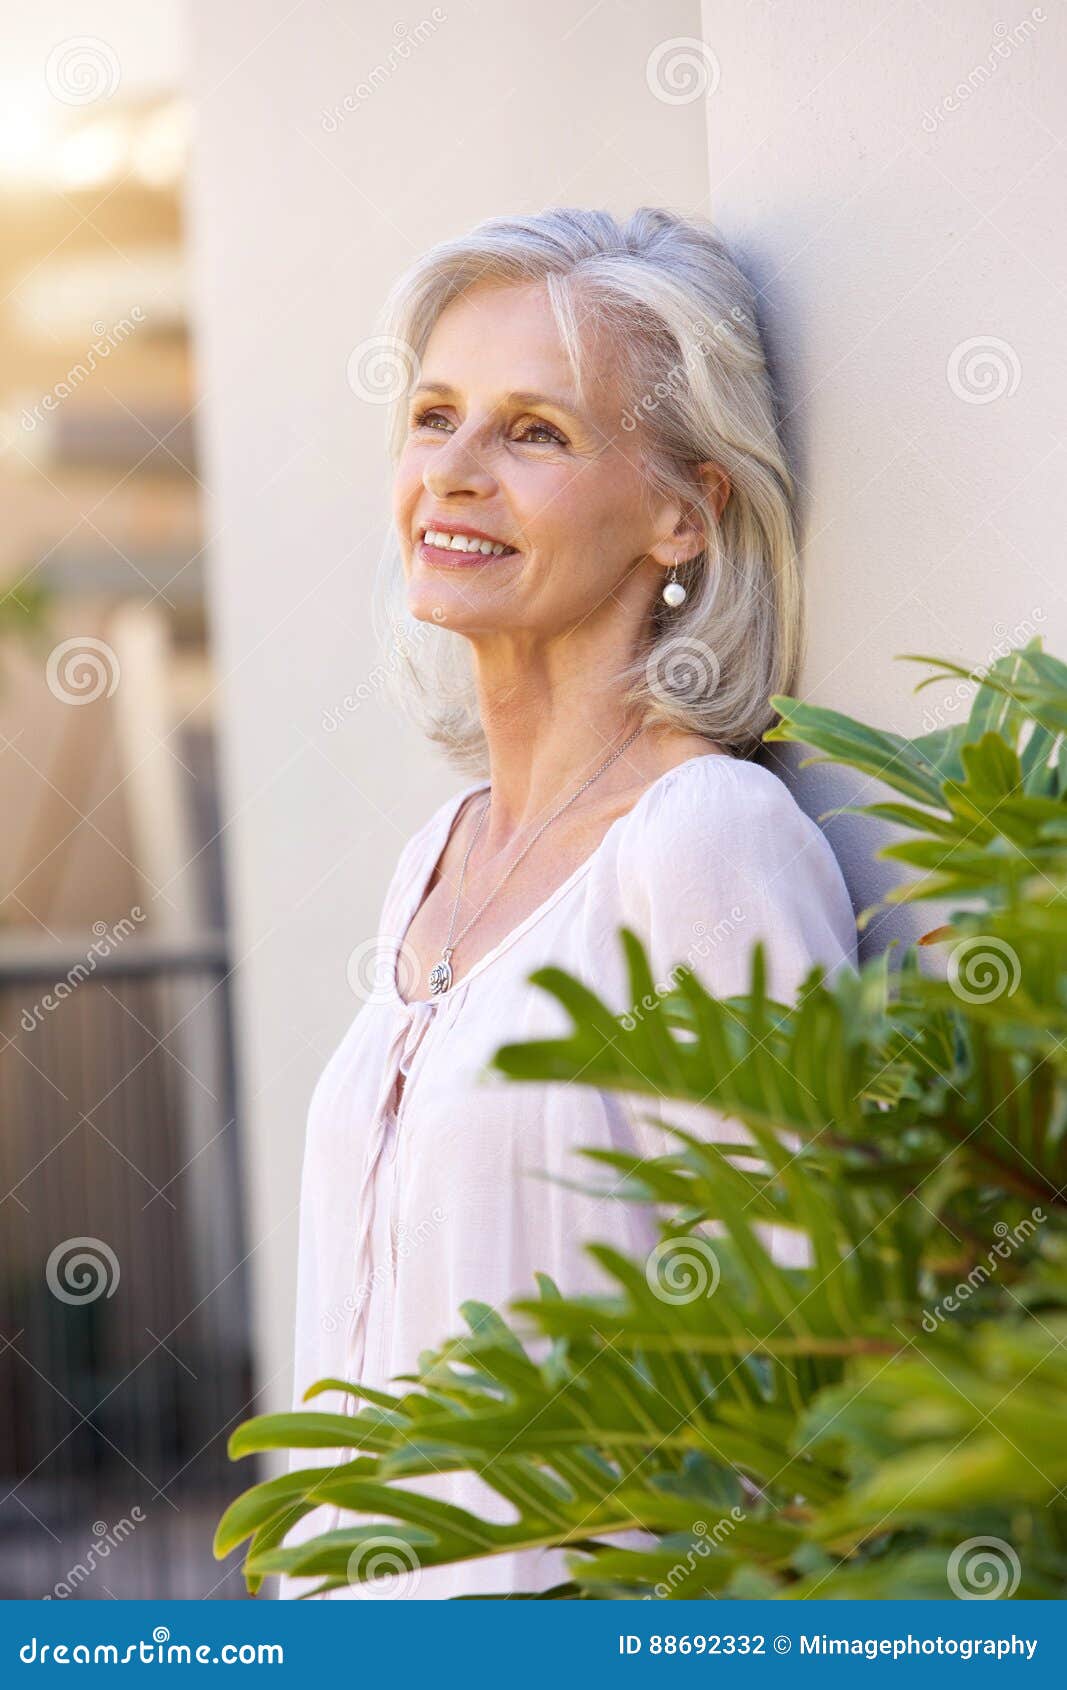 Attractive 60 Year Old Woman Royalty-free Images